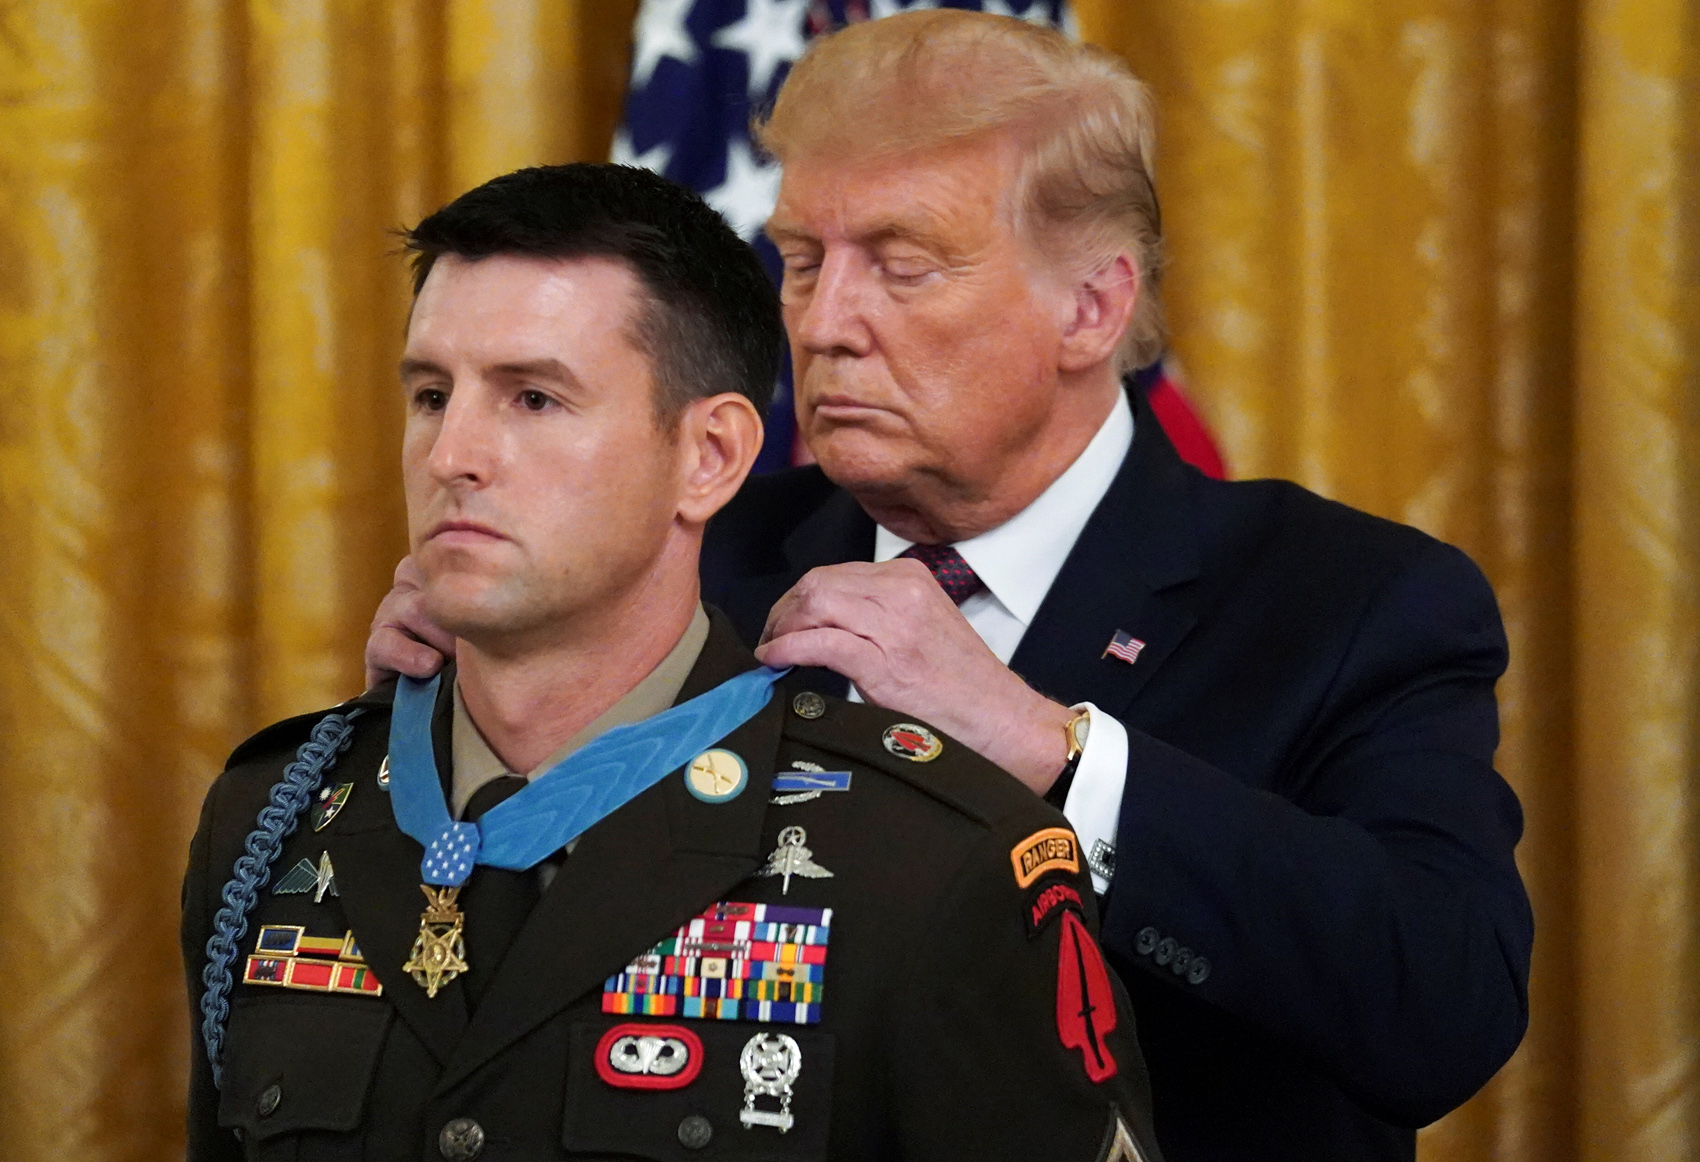 Medal of Honor: America’s Highest Military Decoration, Explained